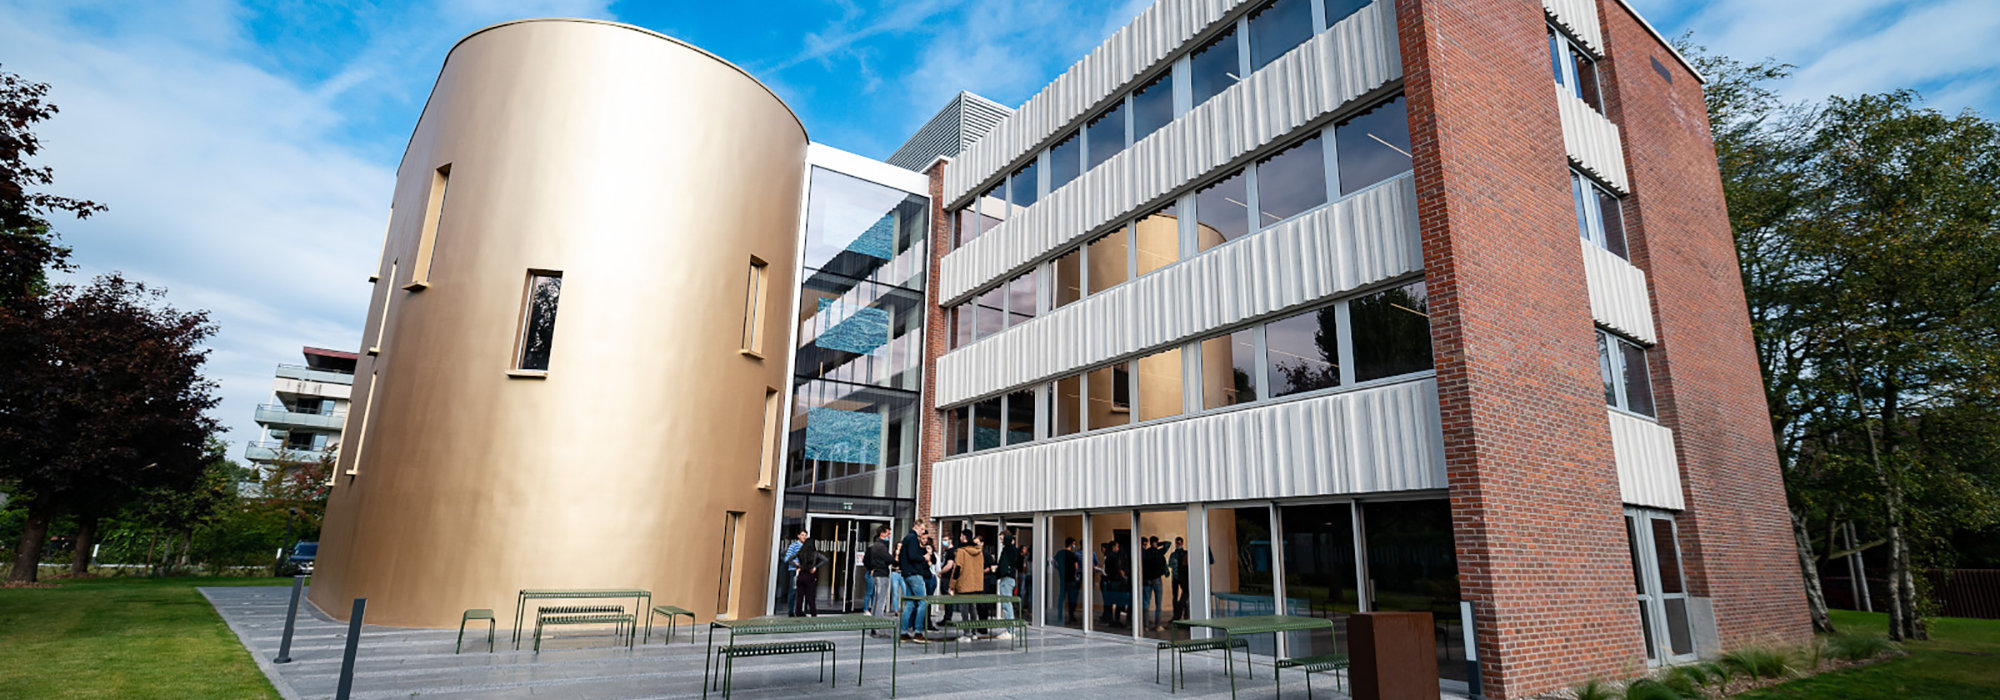 Inauguration of the Jean Arnault Campus in Roubaix, in partnership with  EDHEC Business School and L'Institut des Vocations pour l'Emploi - LVMH